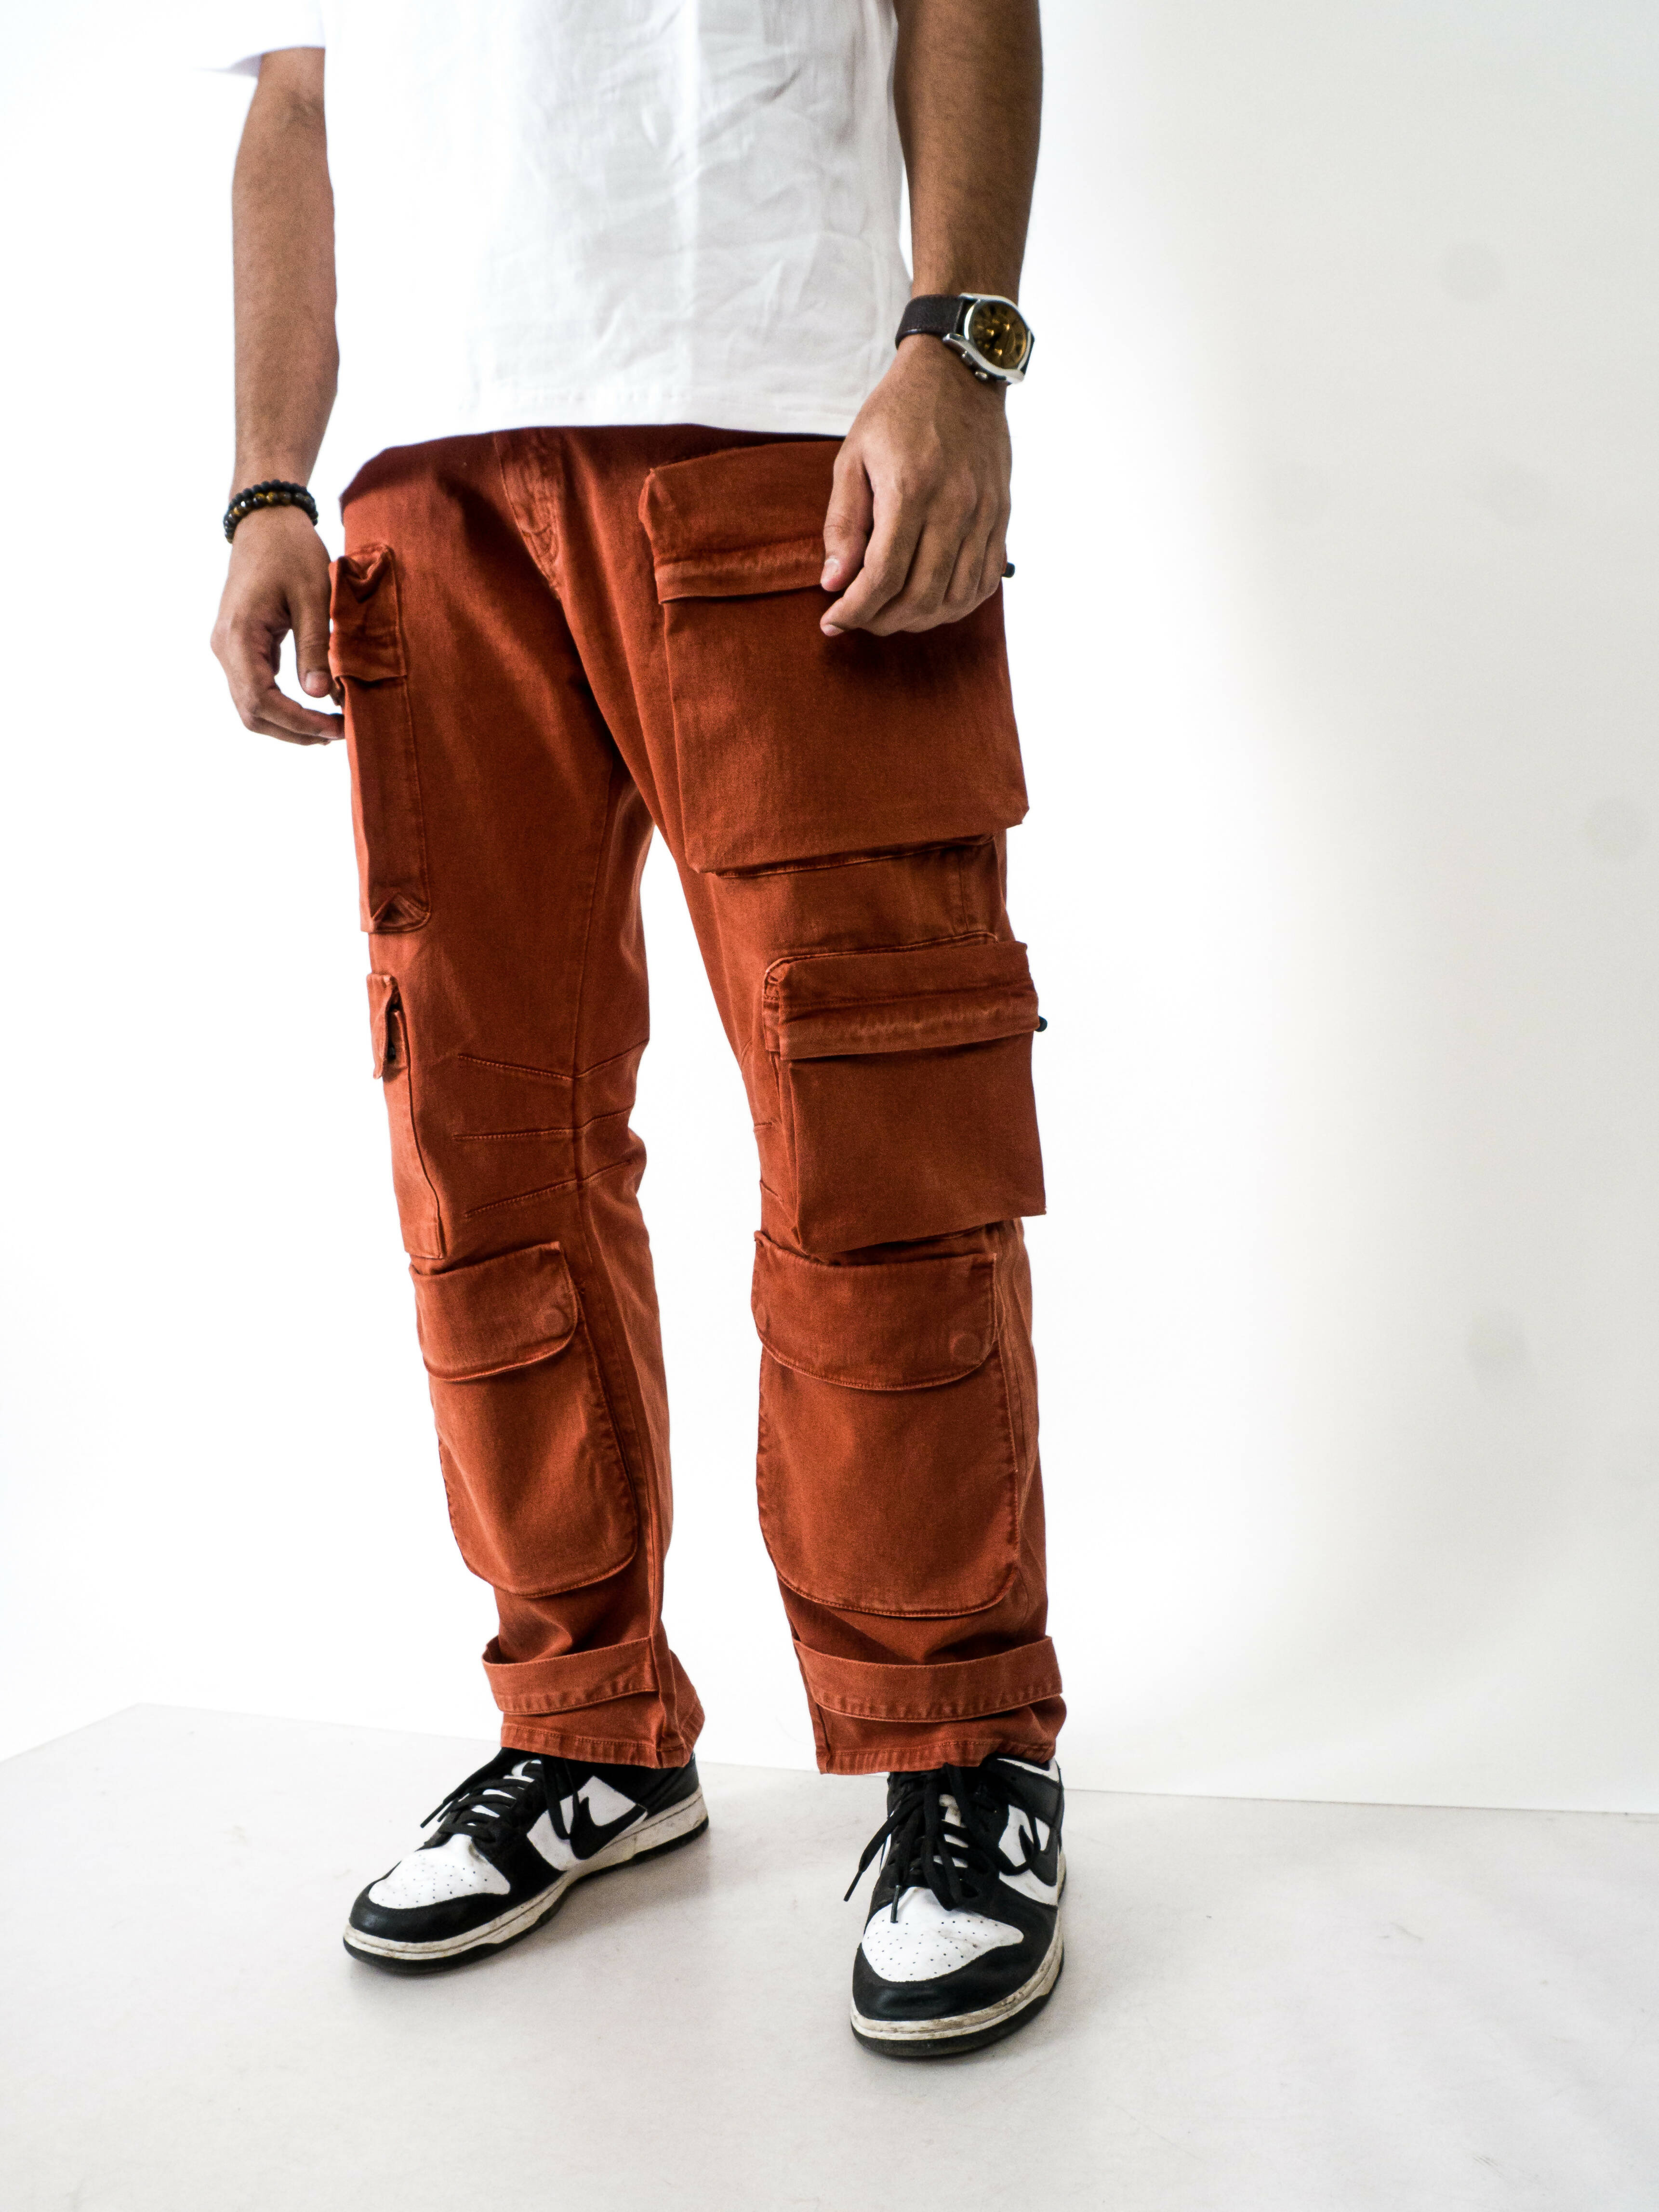 Rusted Cargos by LAB88